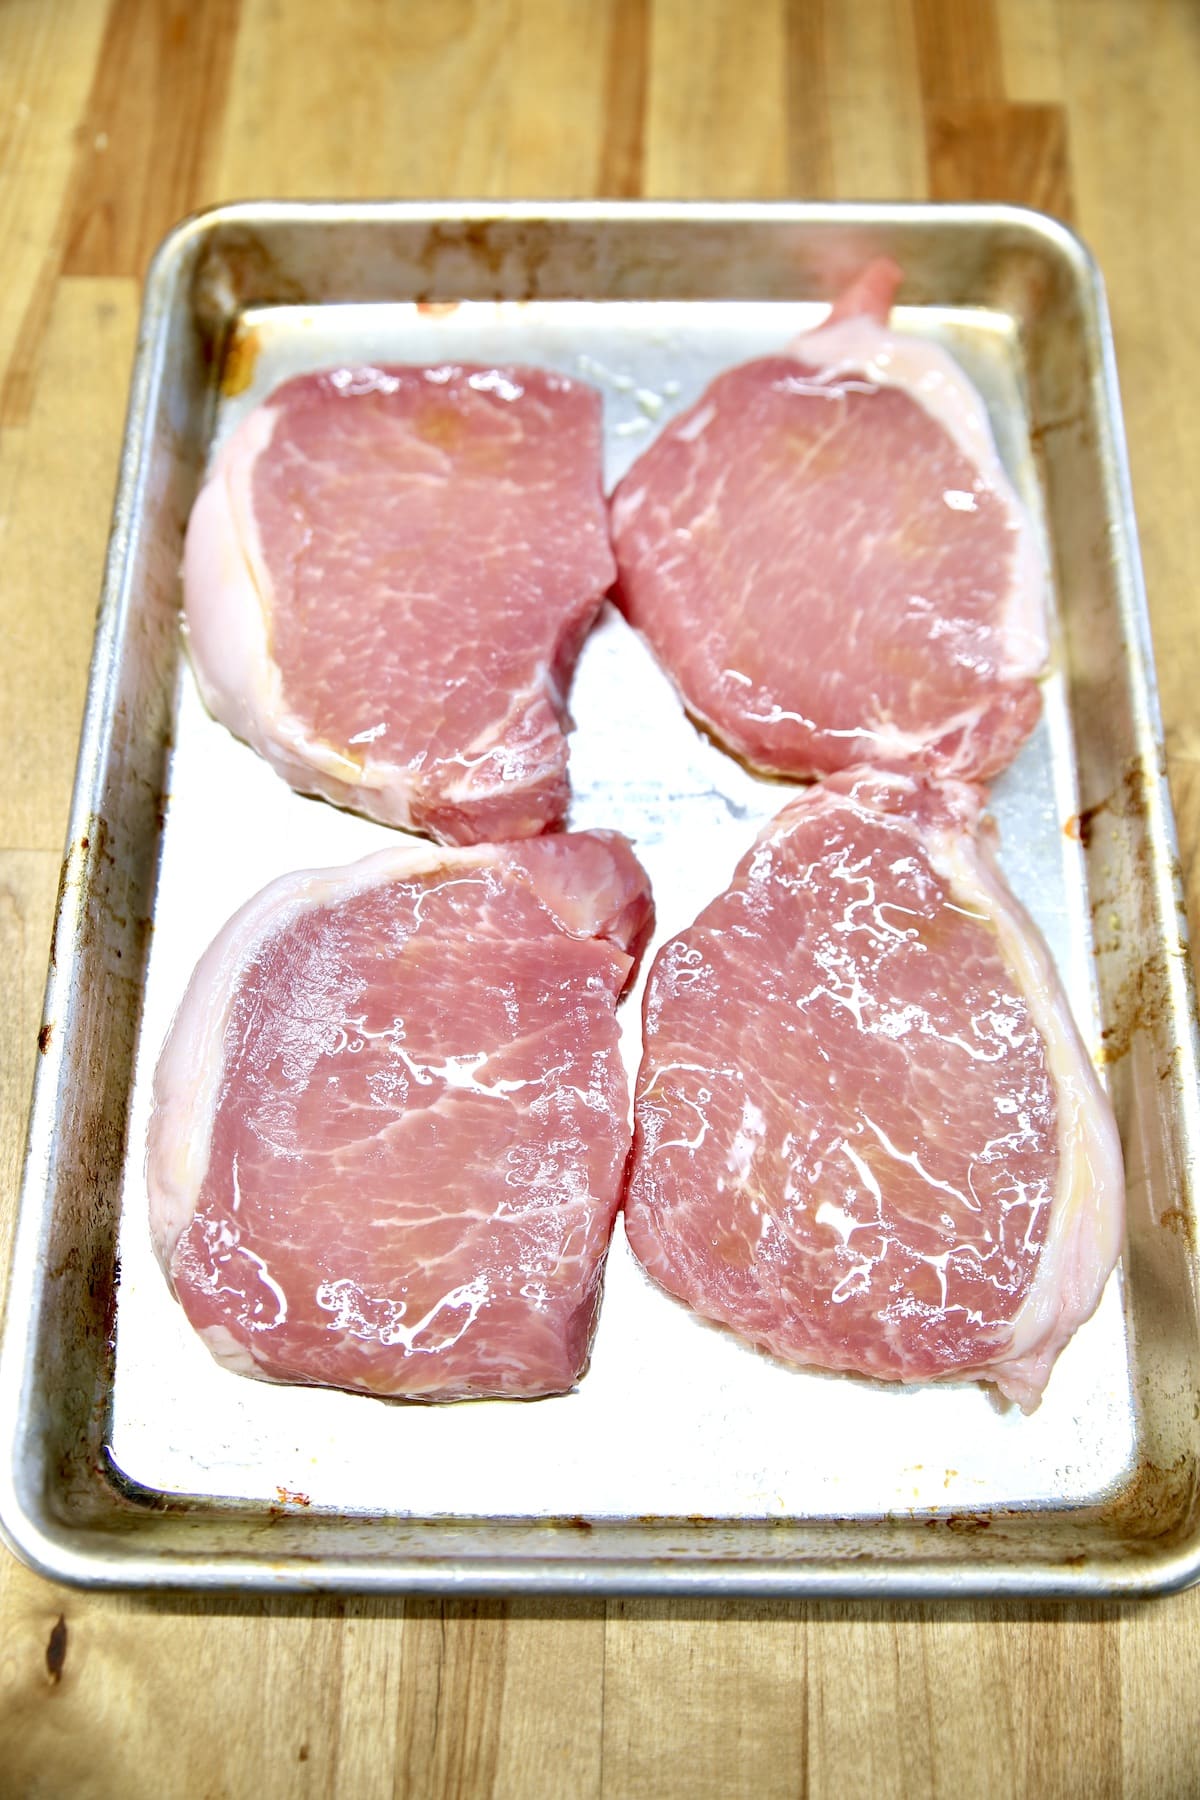 4 boneless raw pork chops coated with olive oil on a sheet pan.